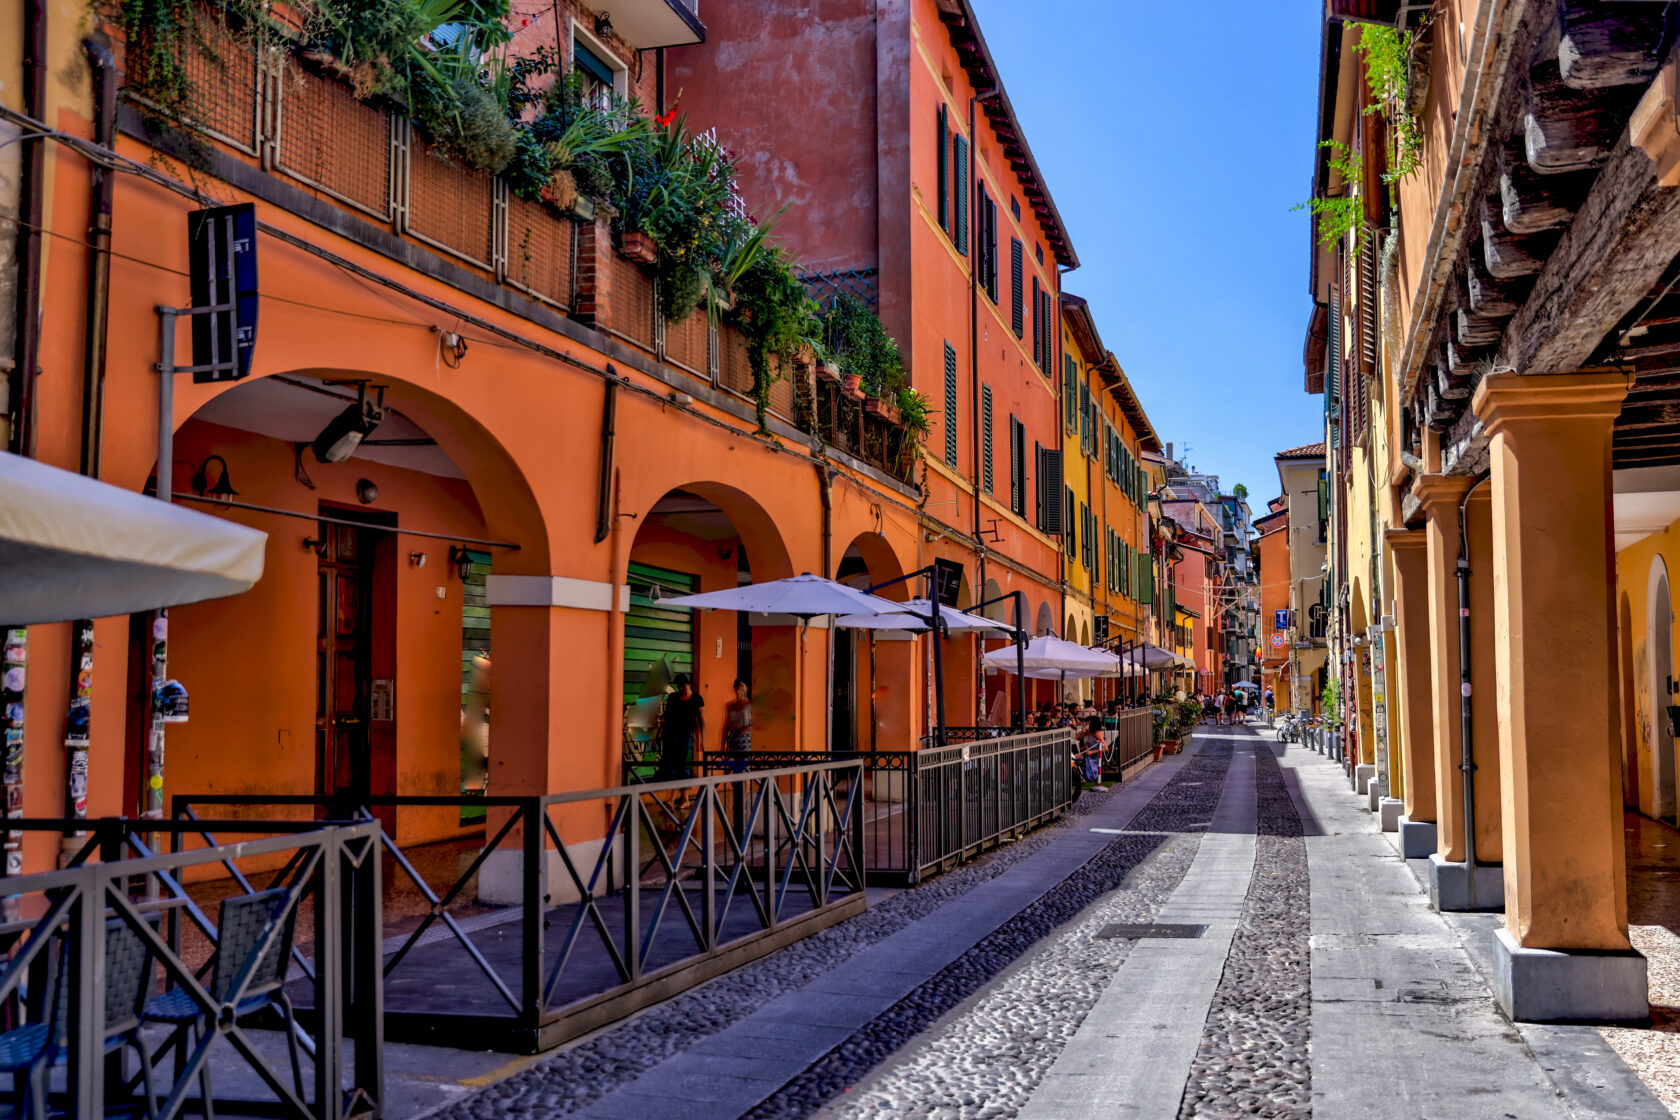 Building facades and medieval architecture along the streets in Bologna, Italy (an Atlantis site).